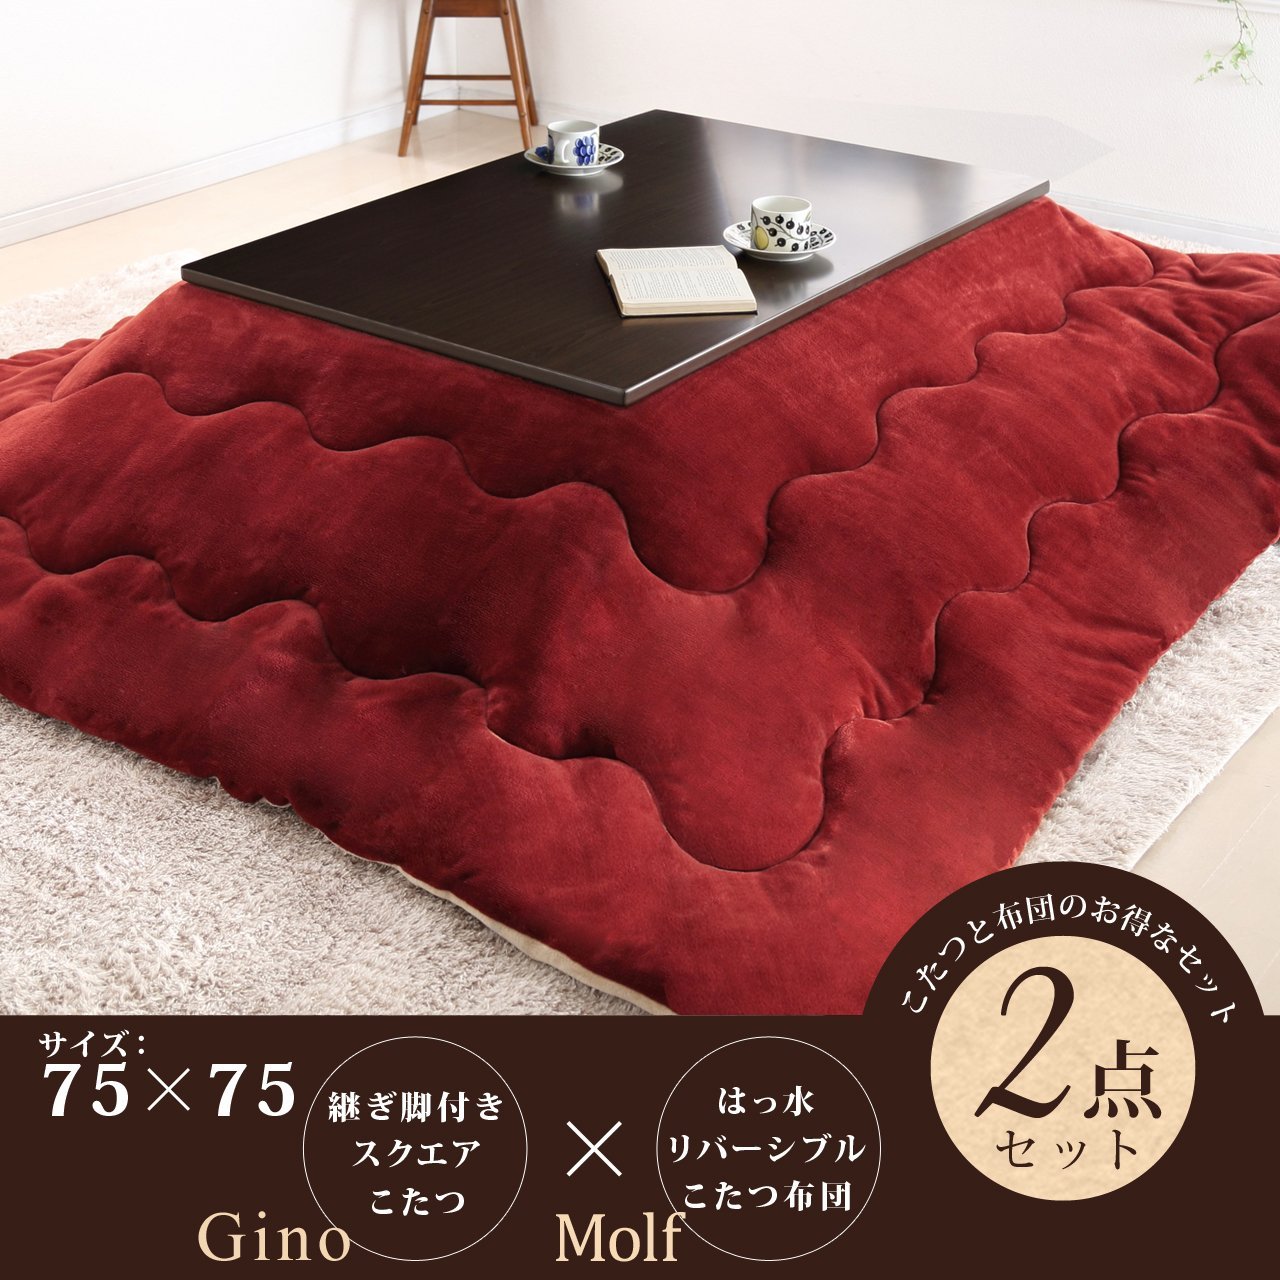 Kotatsu Heated Tables: The Table You Might Not Want to Leave in the Winter